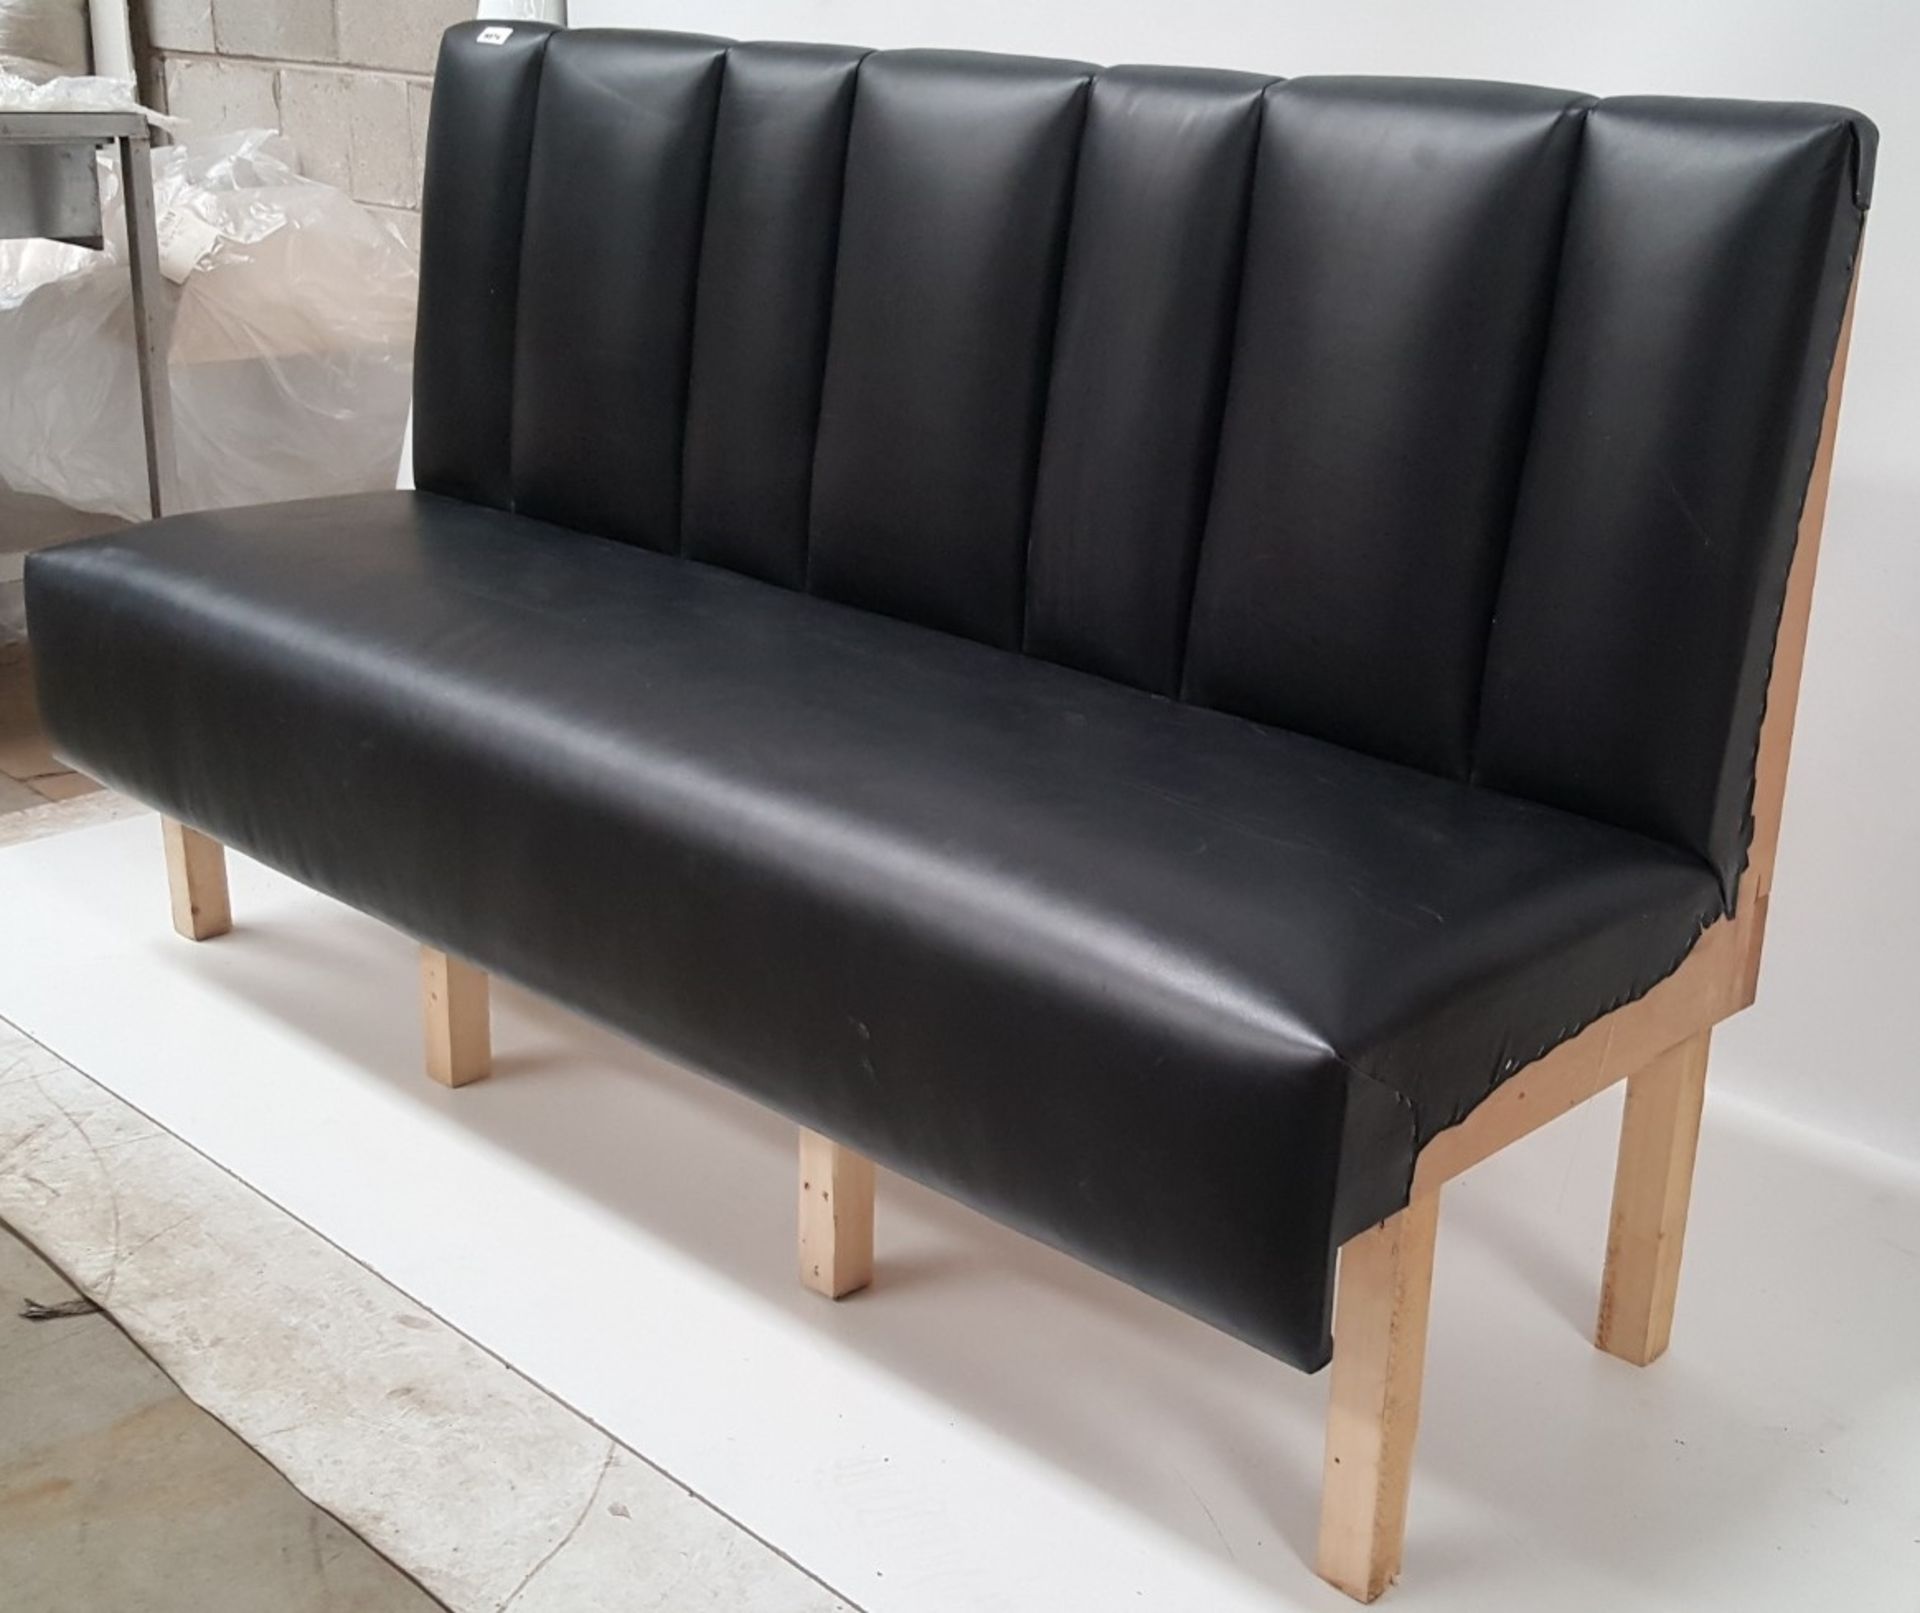 3 Pieces Of Black Upholstered Faux Leather Seating Booths - CL431 - Location: Altrincham WA14 - Image 3 of 19